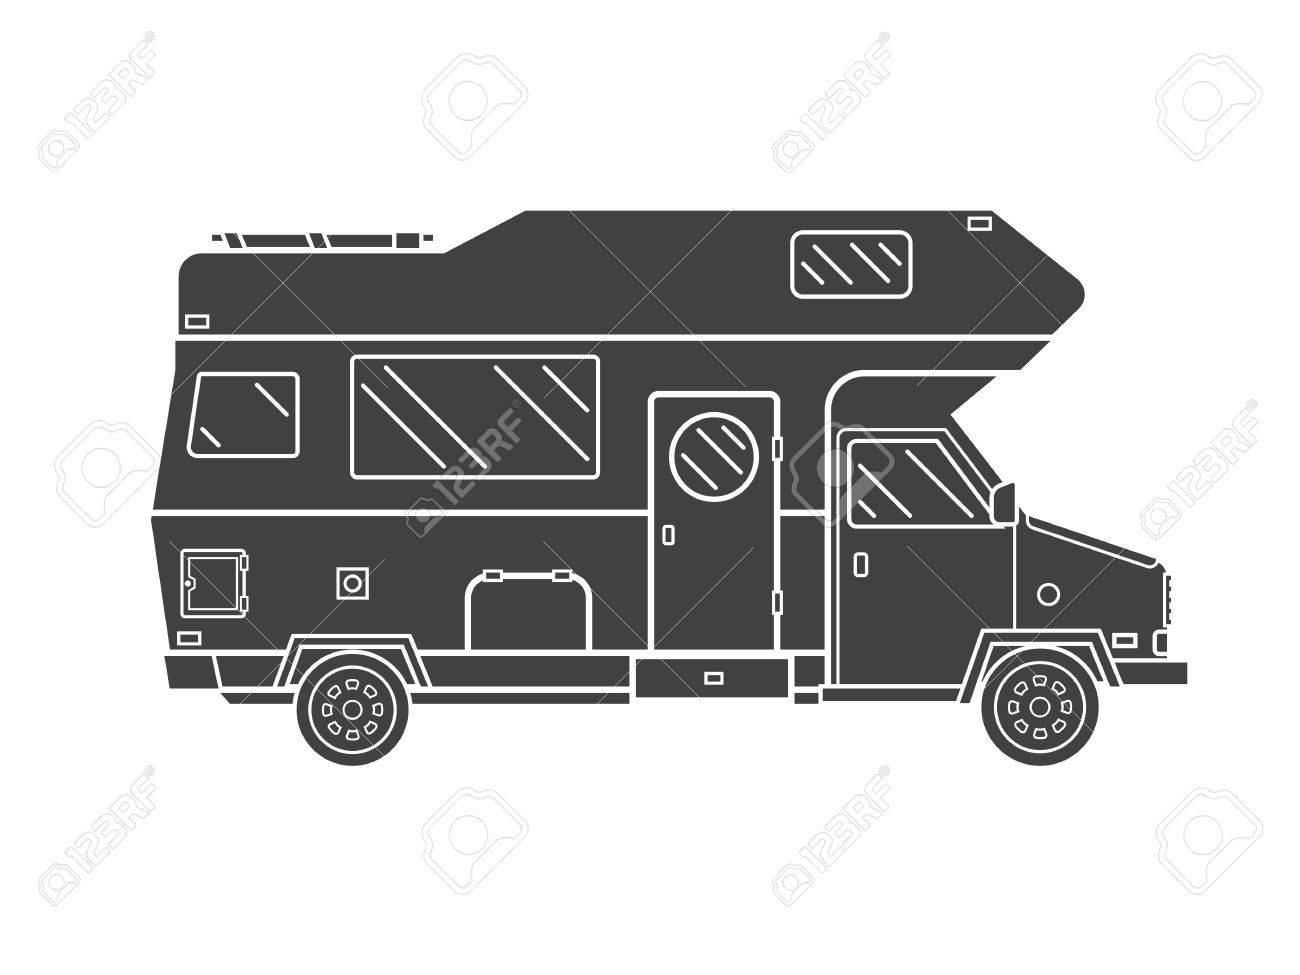 Camper Icon White Background  Stock Vector  marcotrapani #163616190